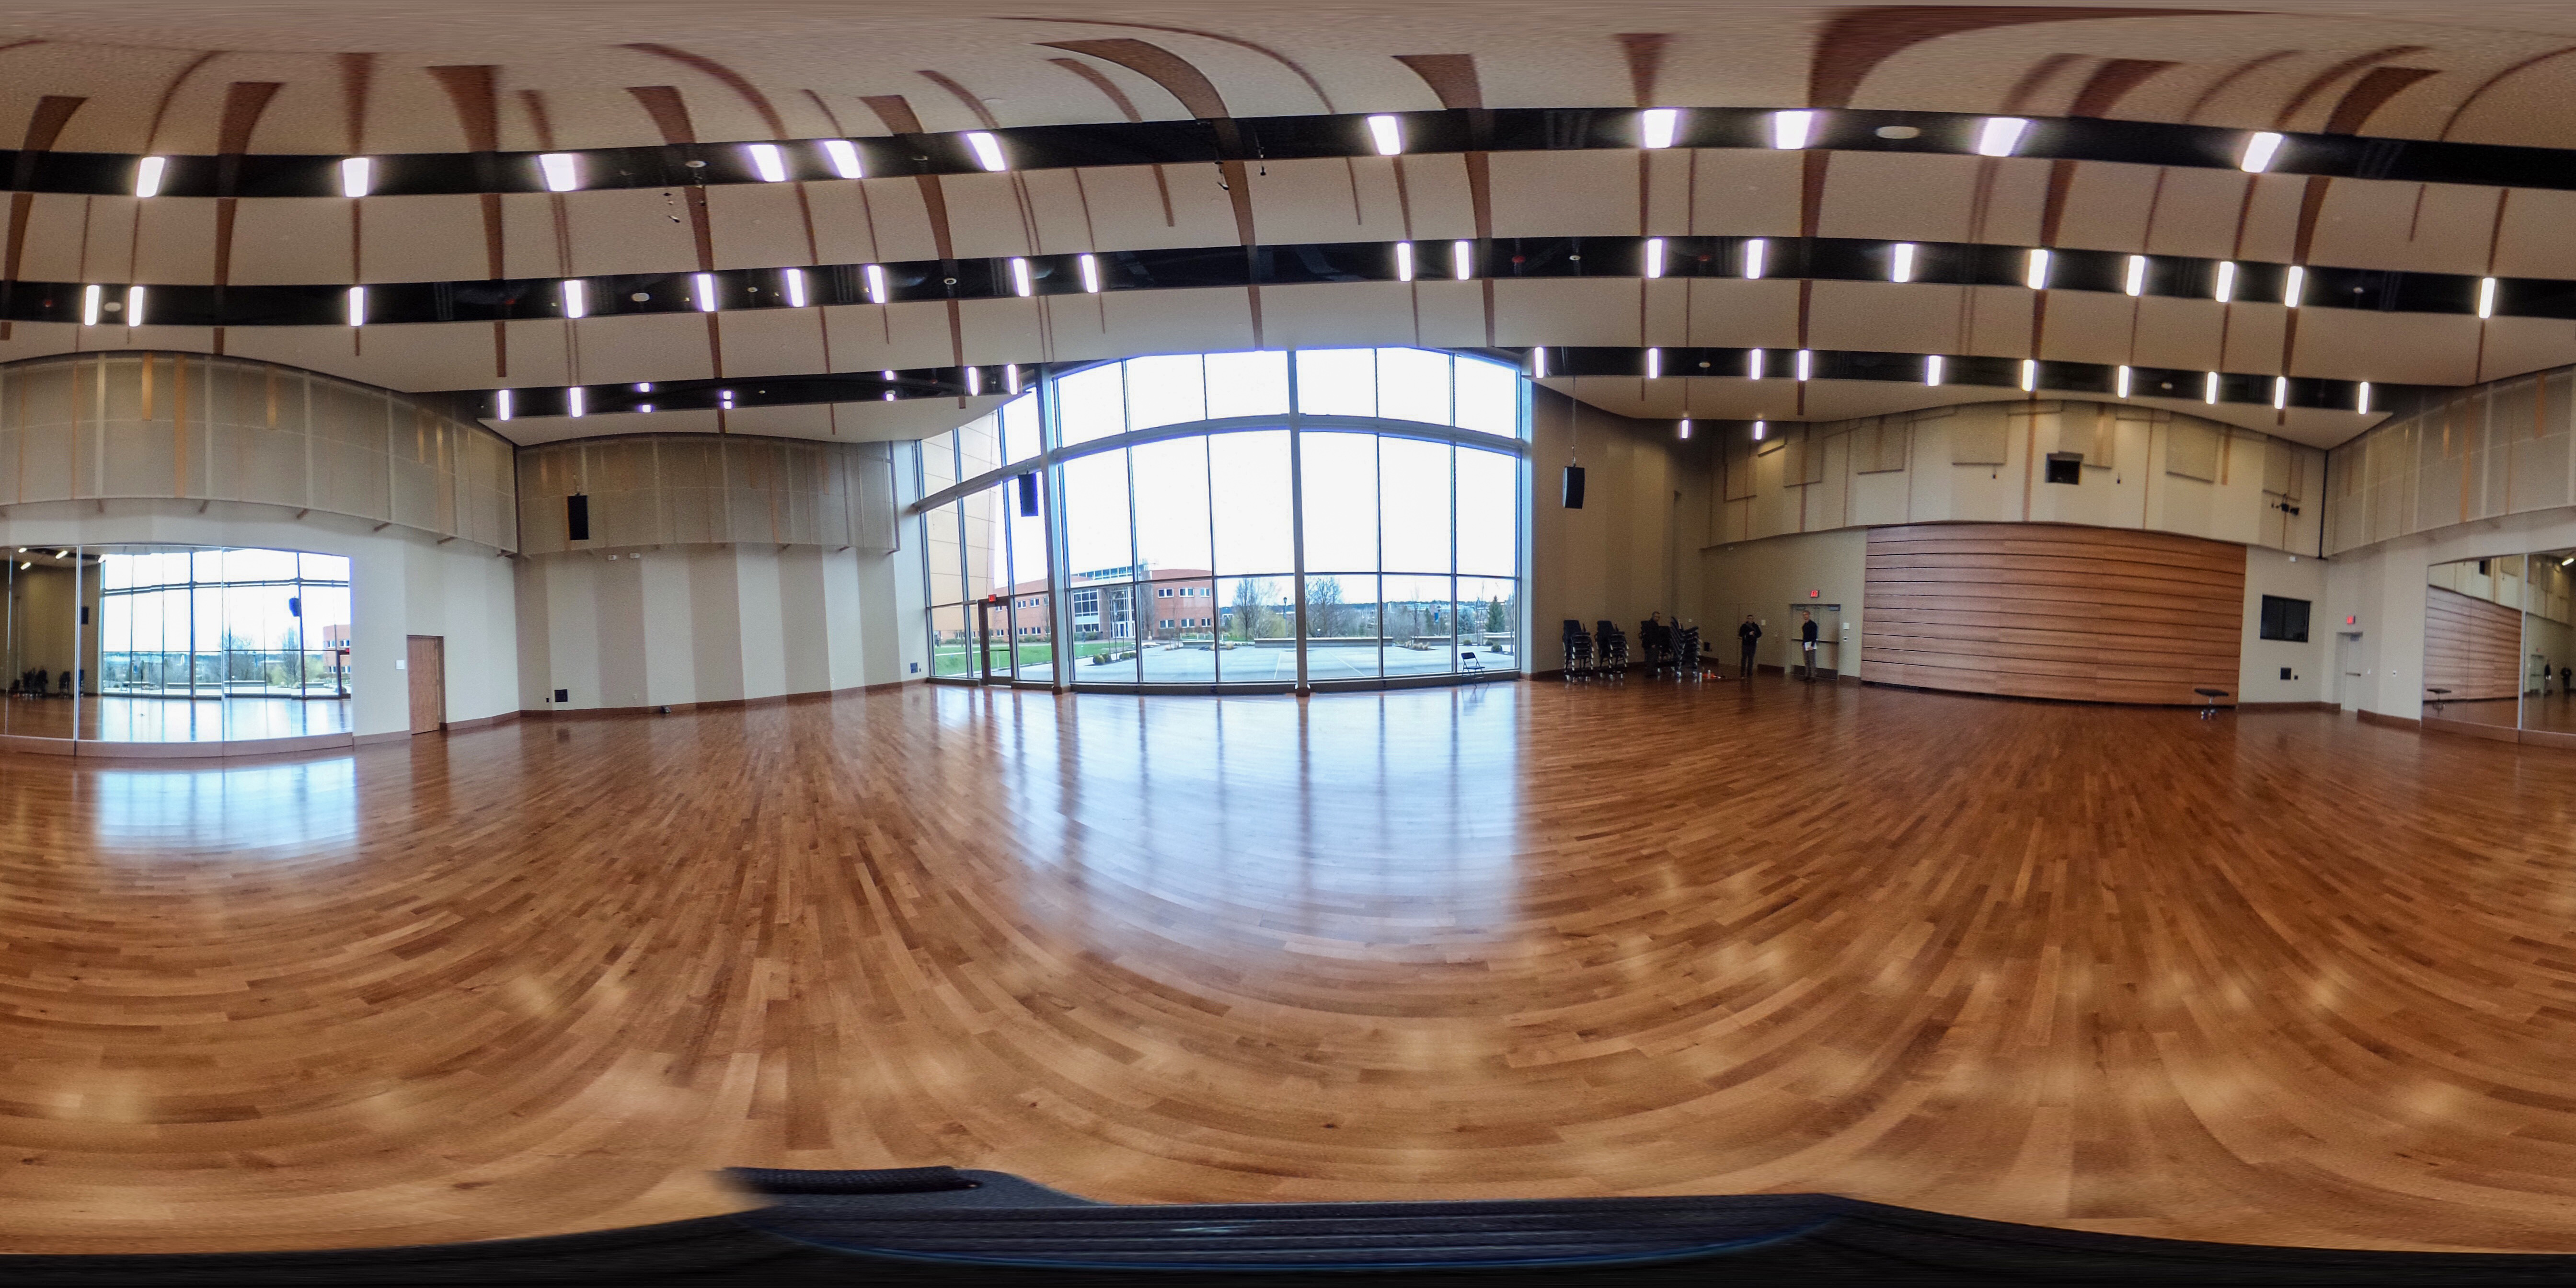 Woldson Performing Arts Center - Recital and rehearsal hall